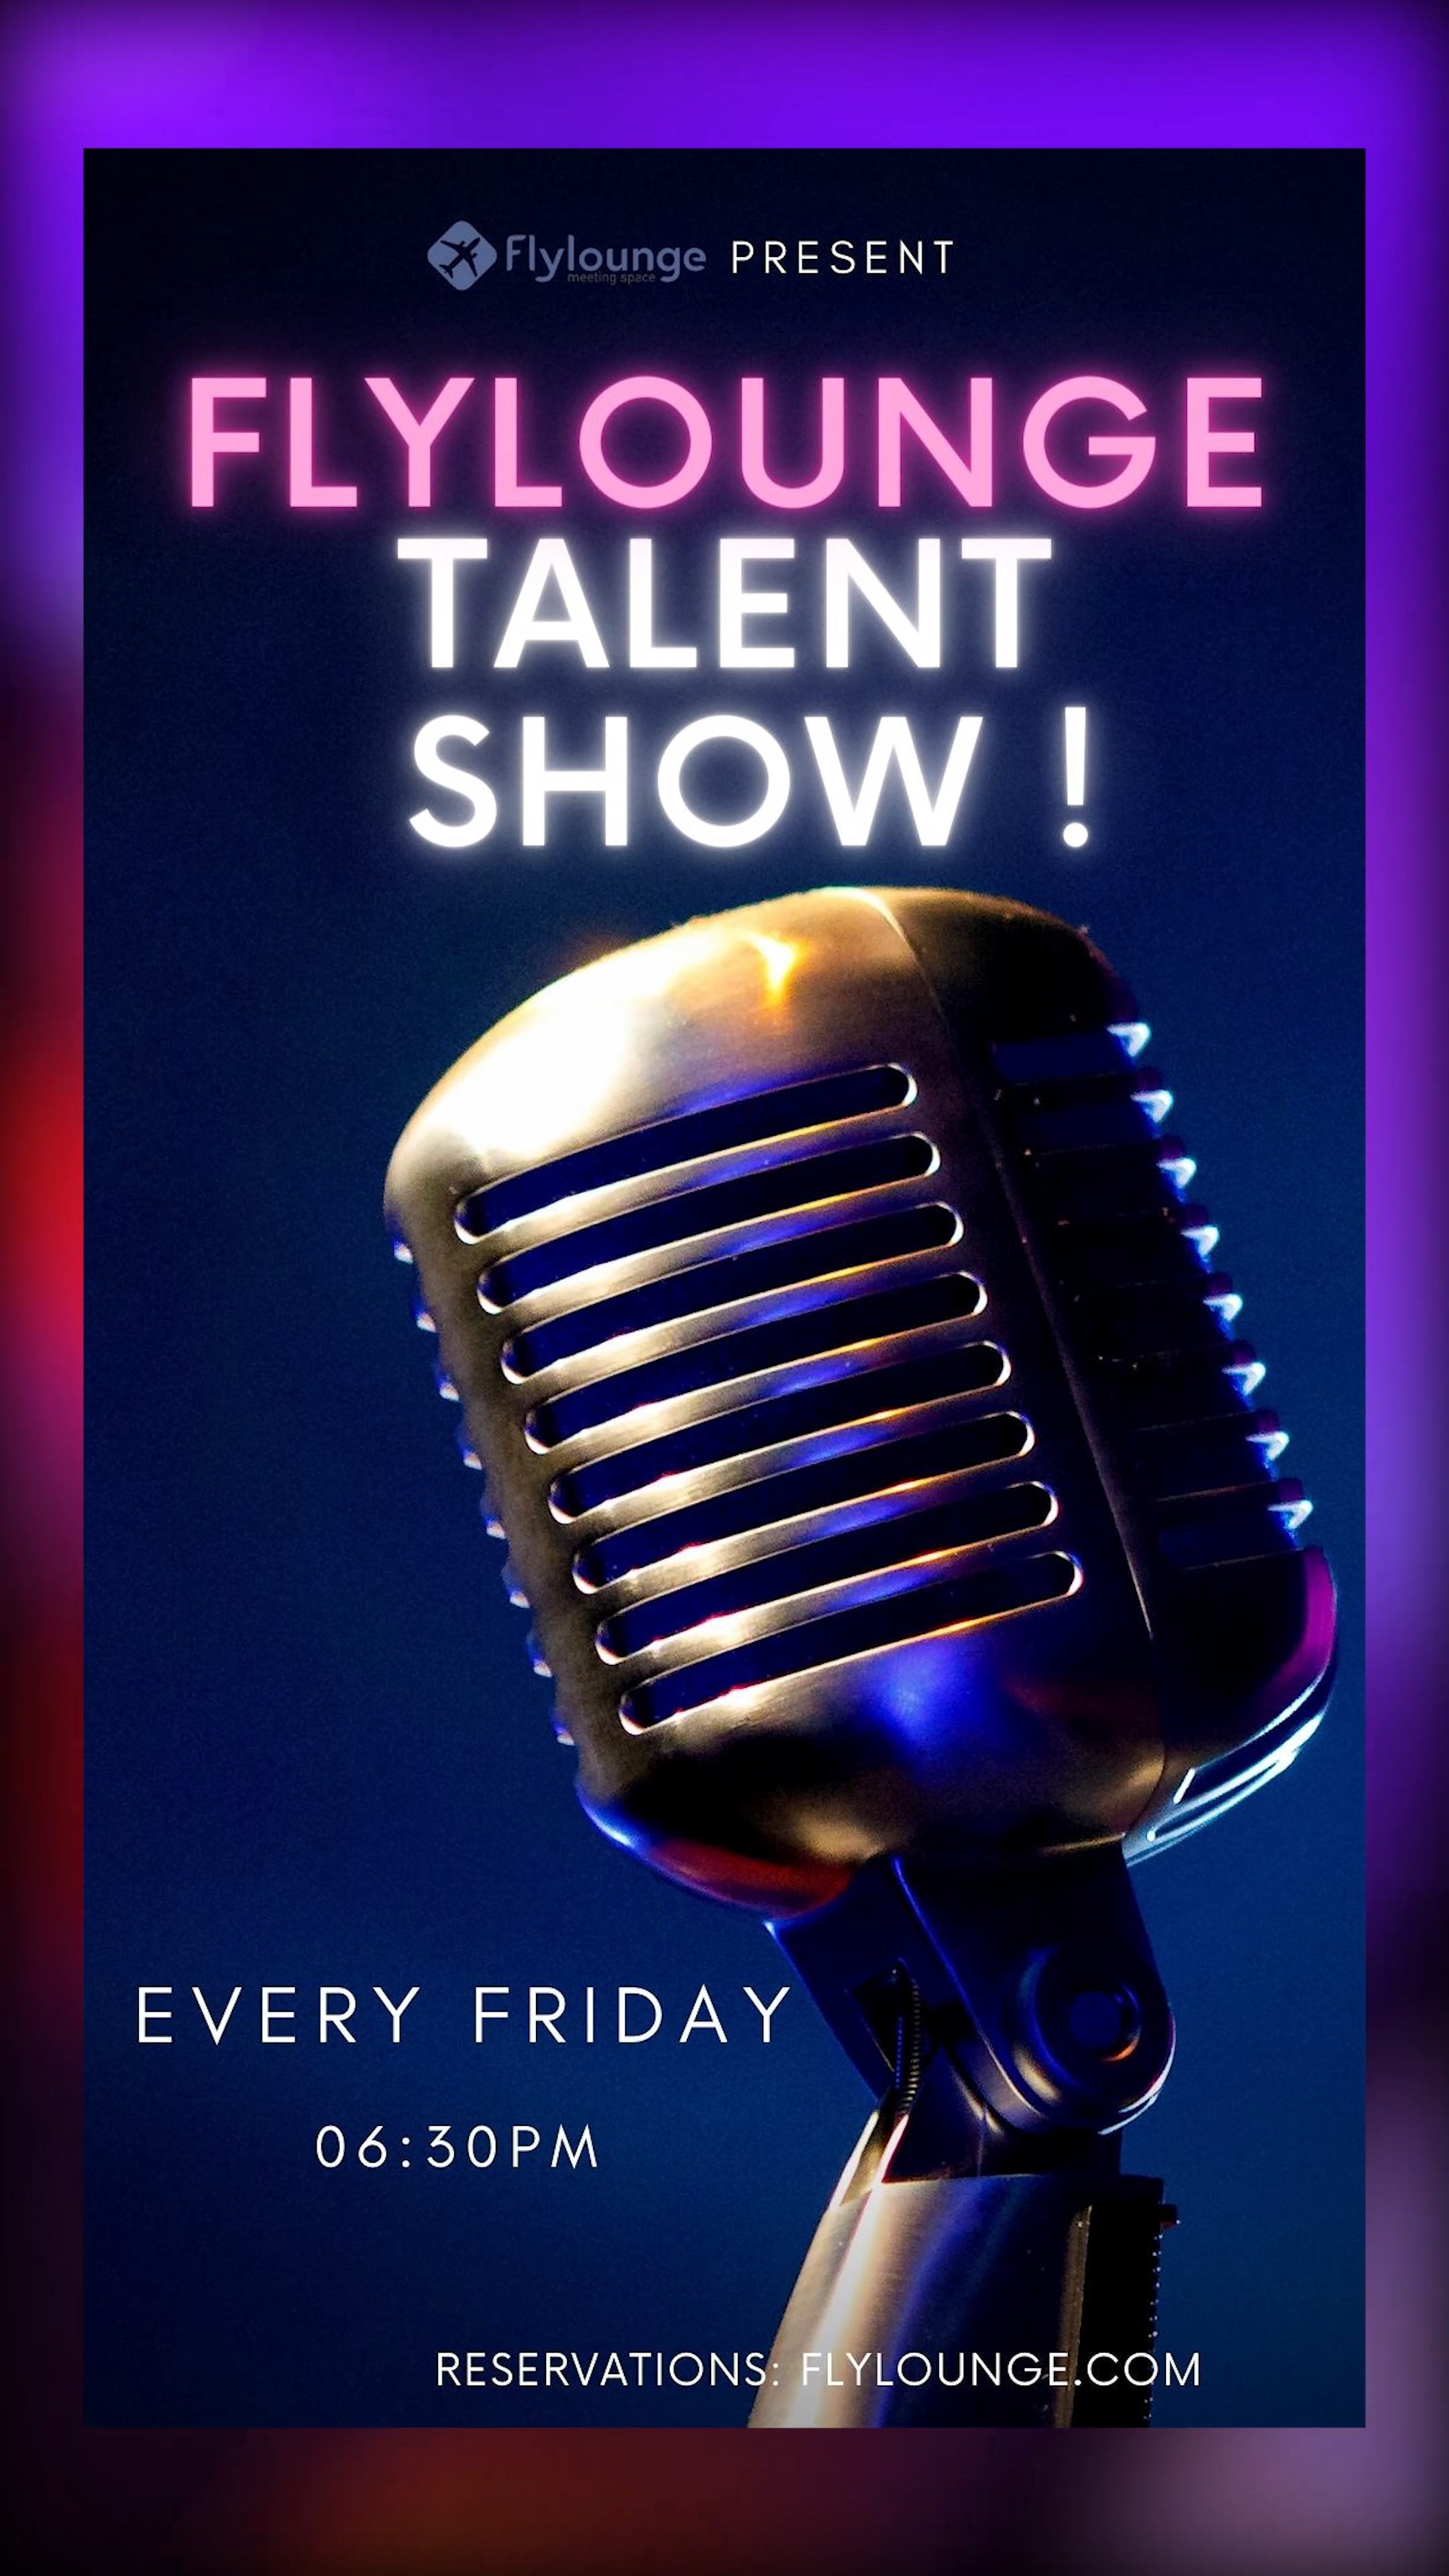 Flylounge talent-show